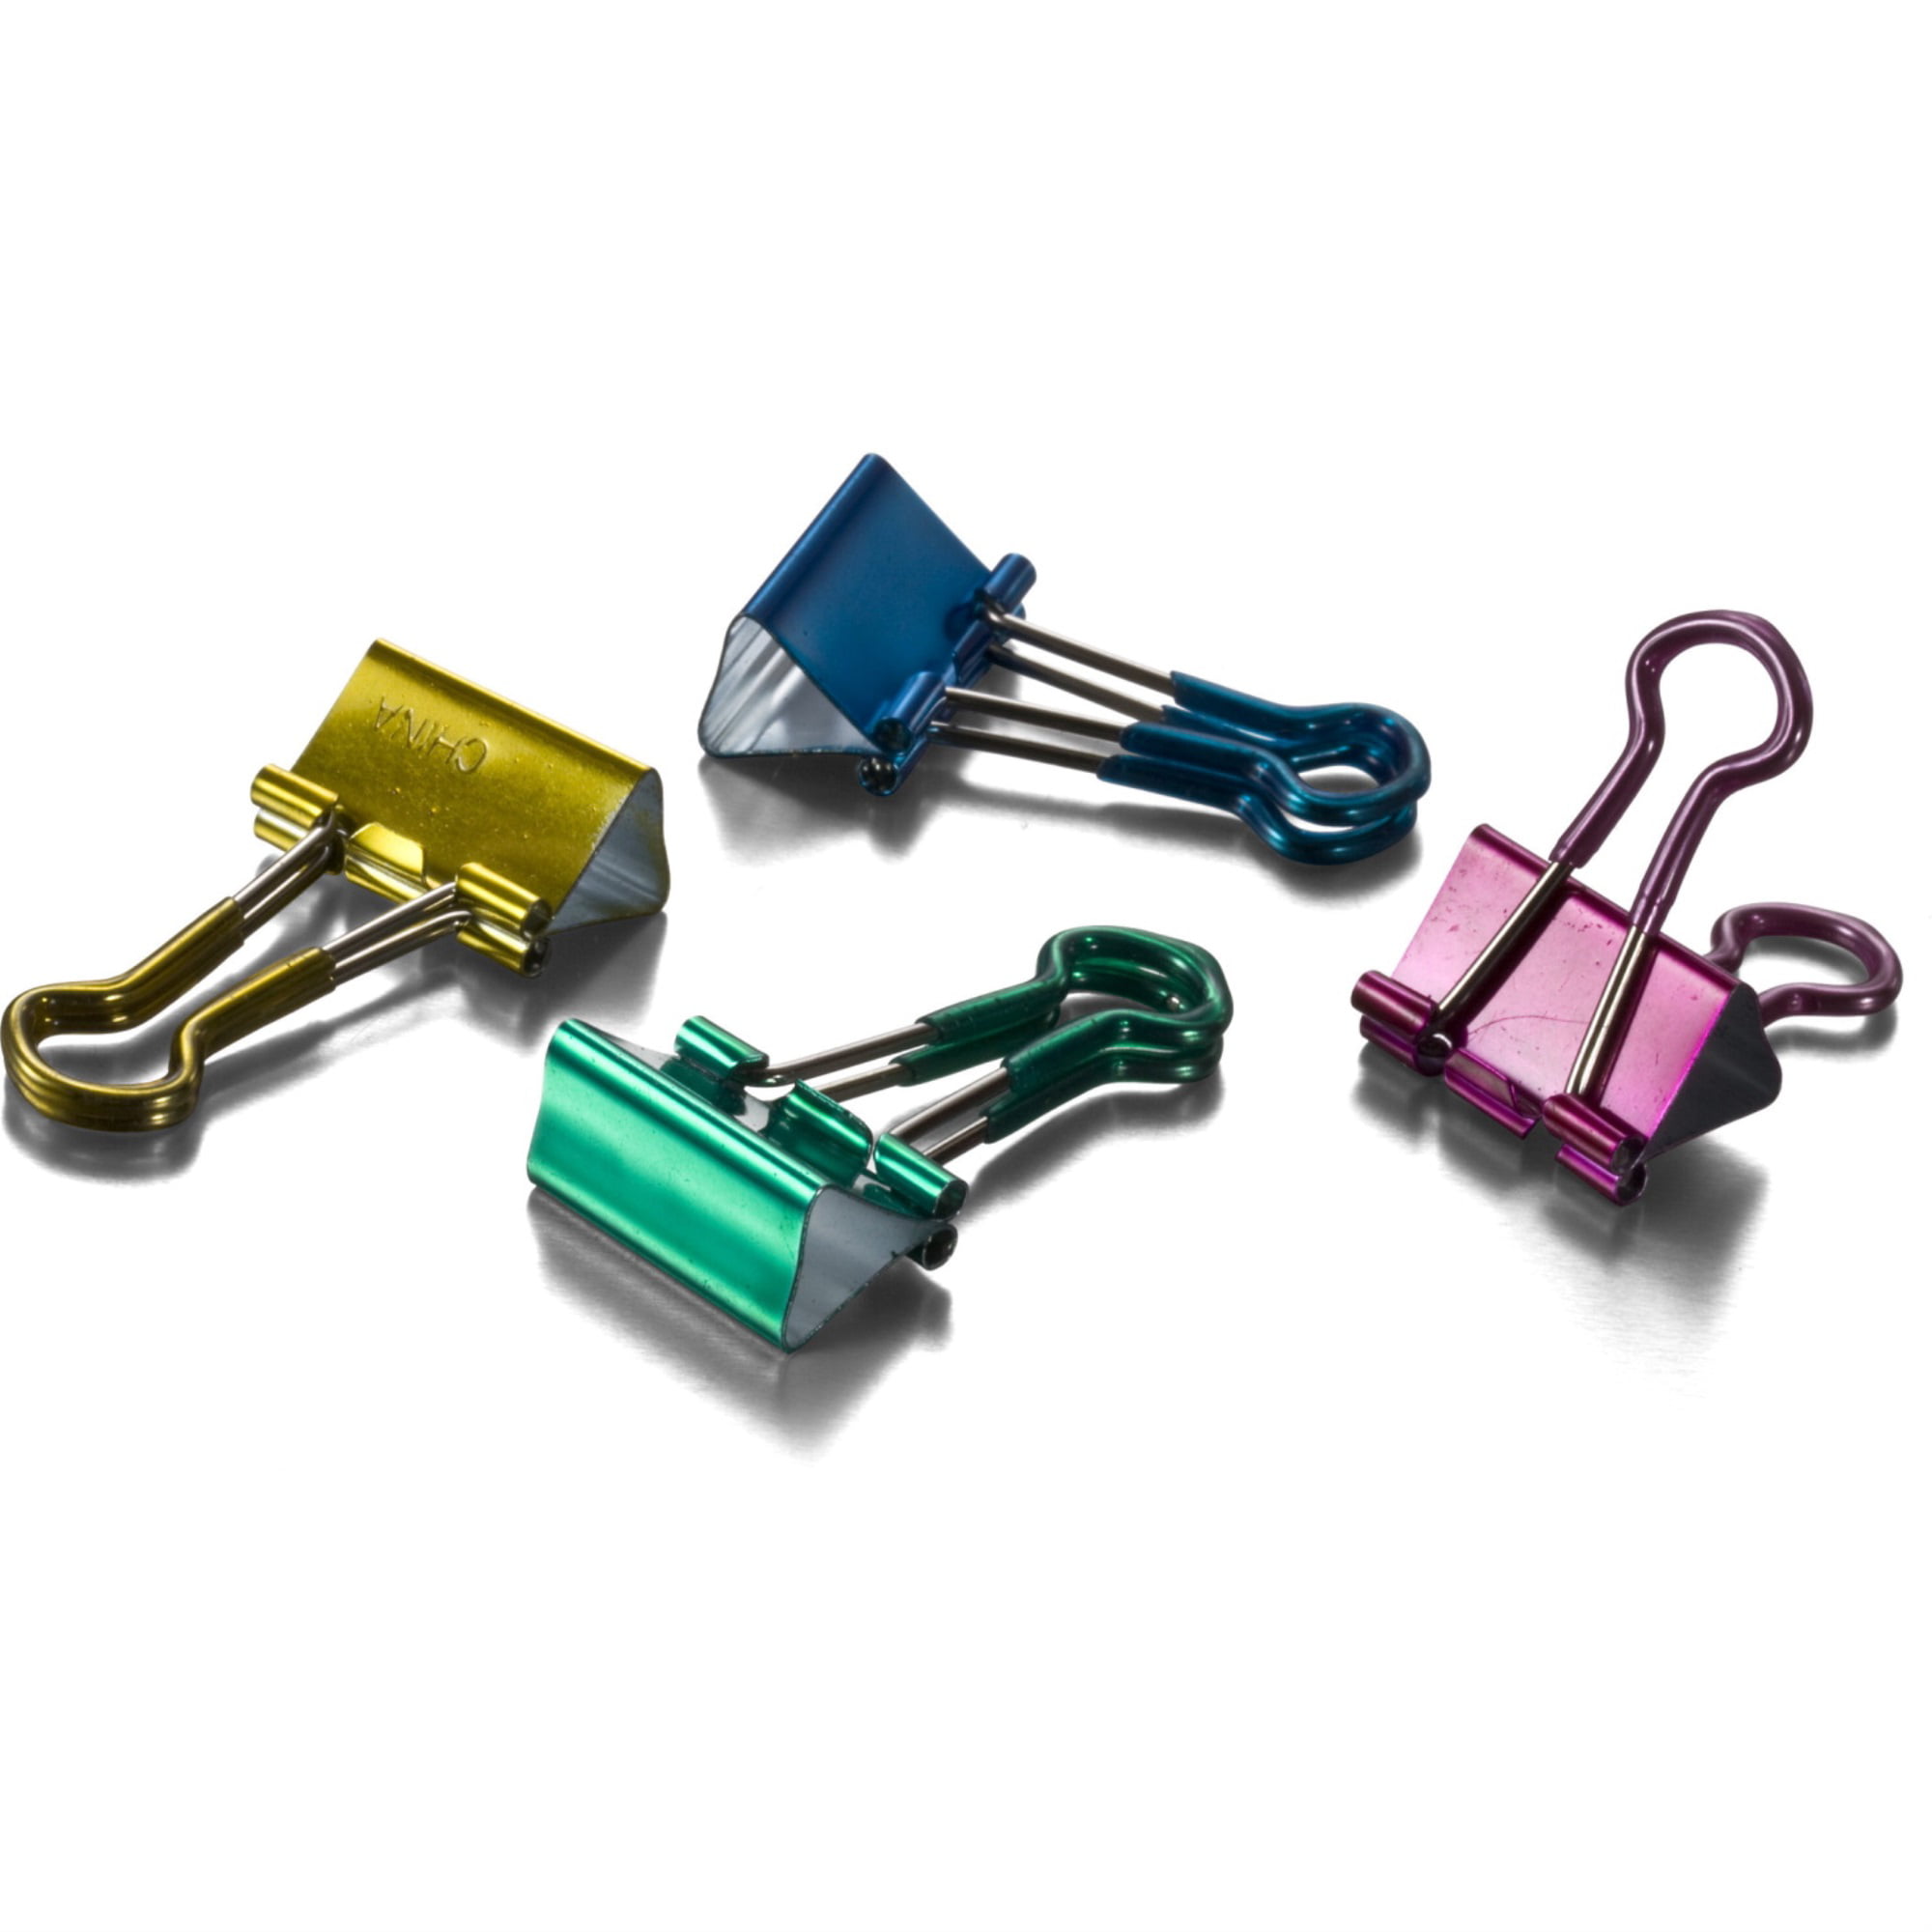 Pack of 6 Metallic Large Officemate Easy Grip Binder Clips 